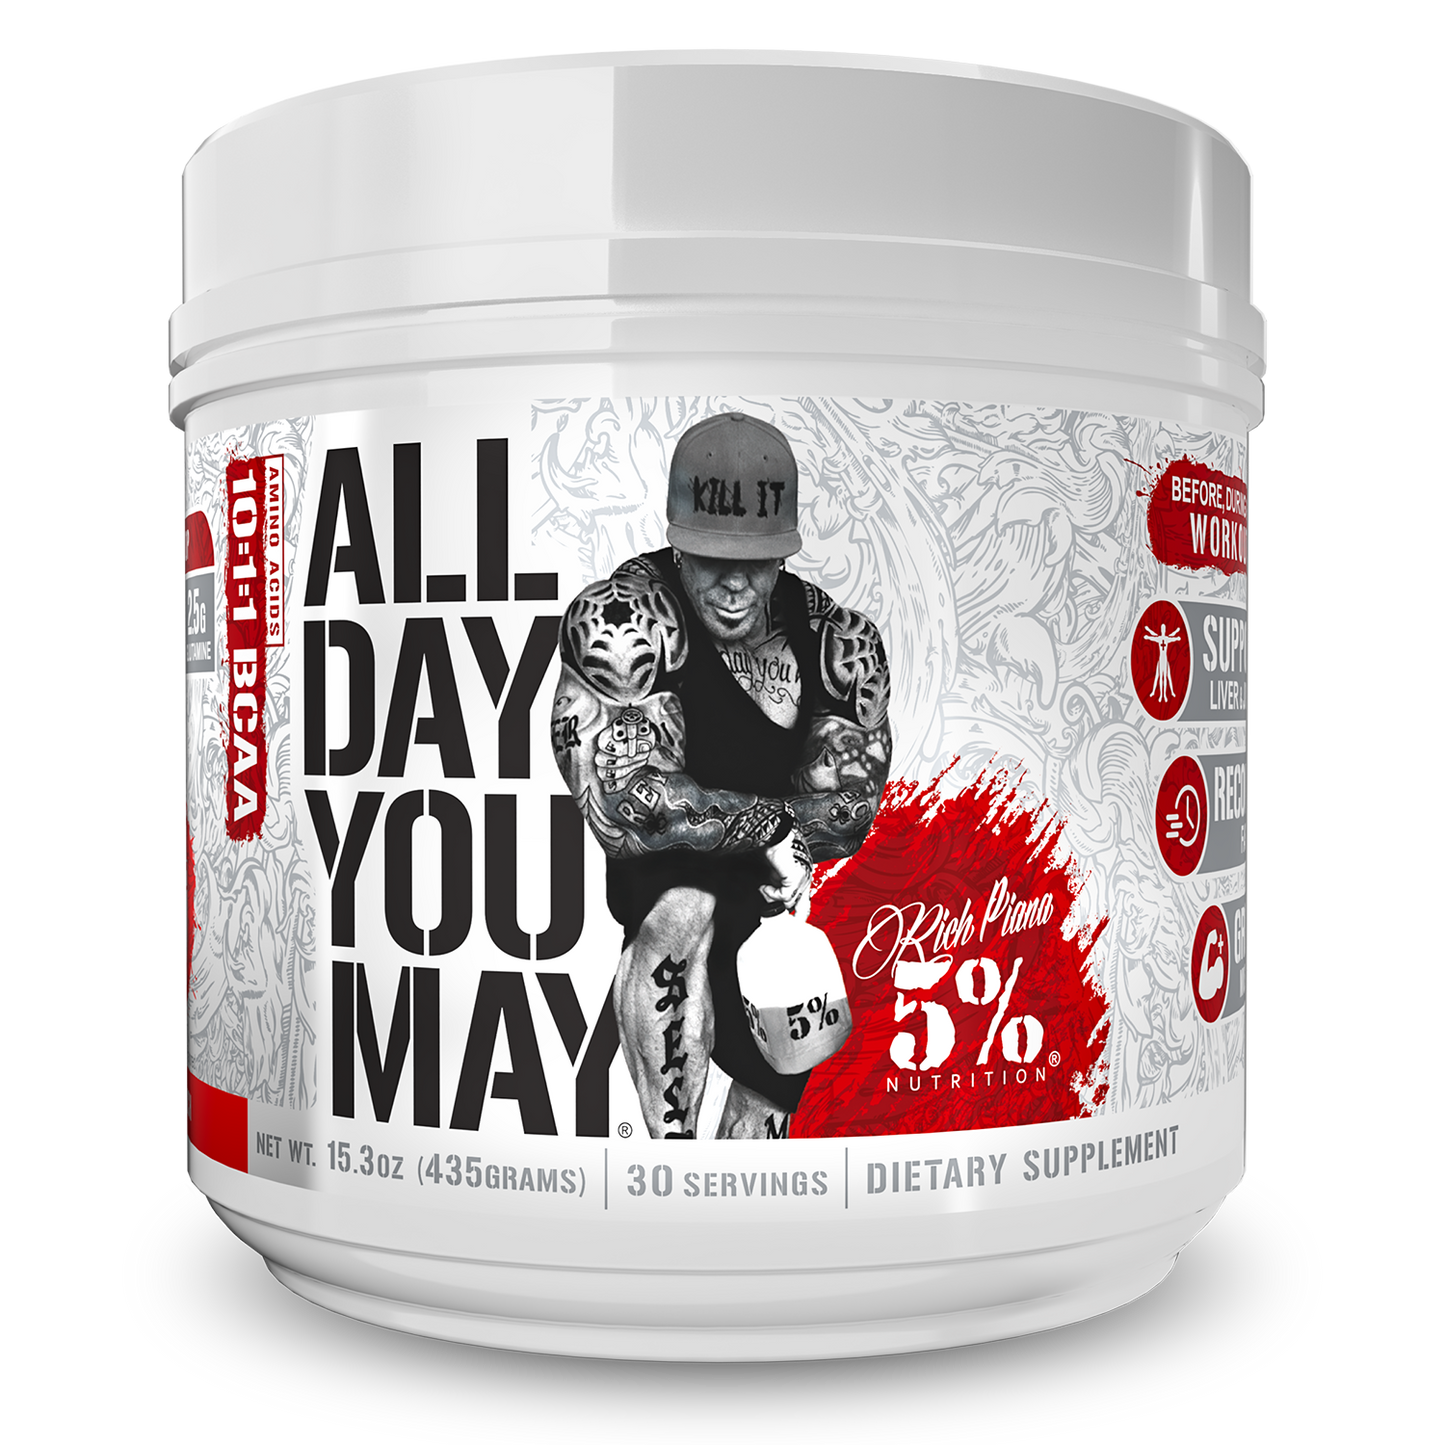 5% Nutrition All Day You May (30 Servings)